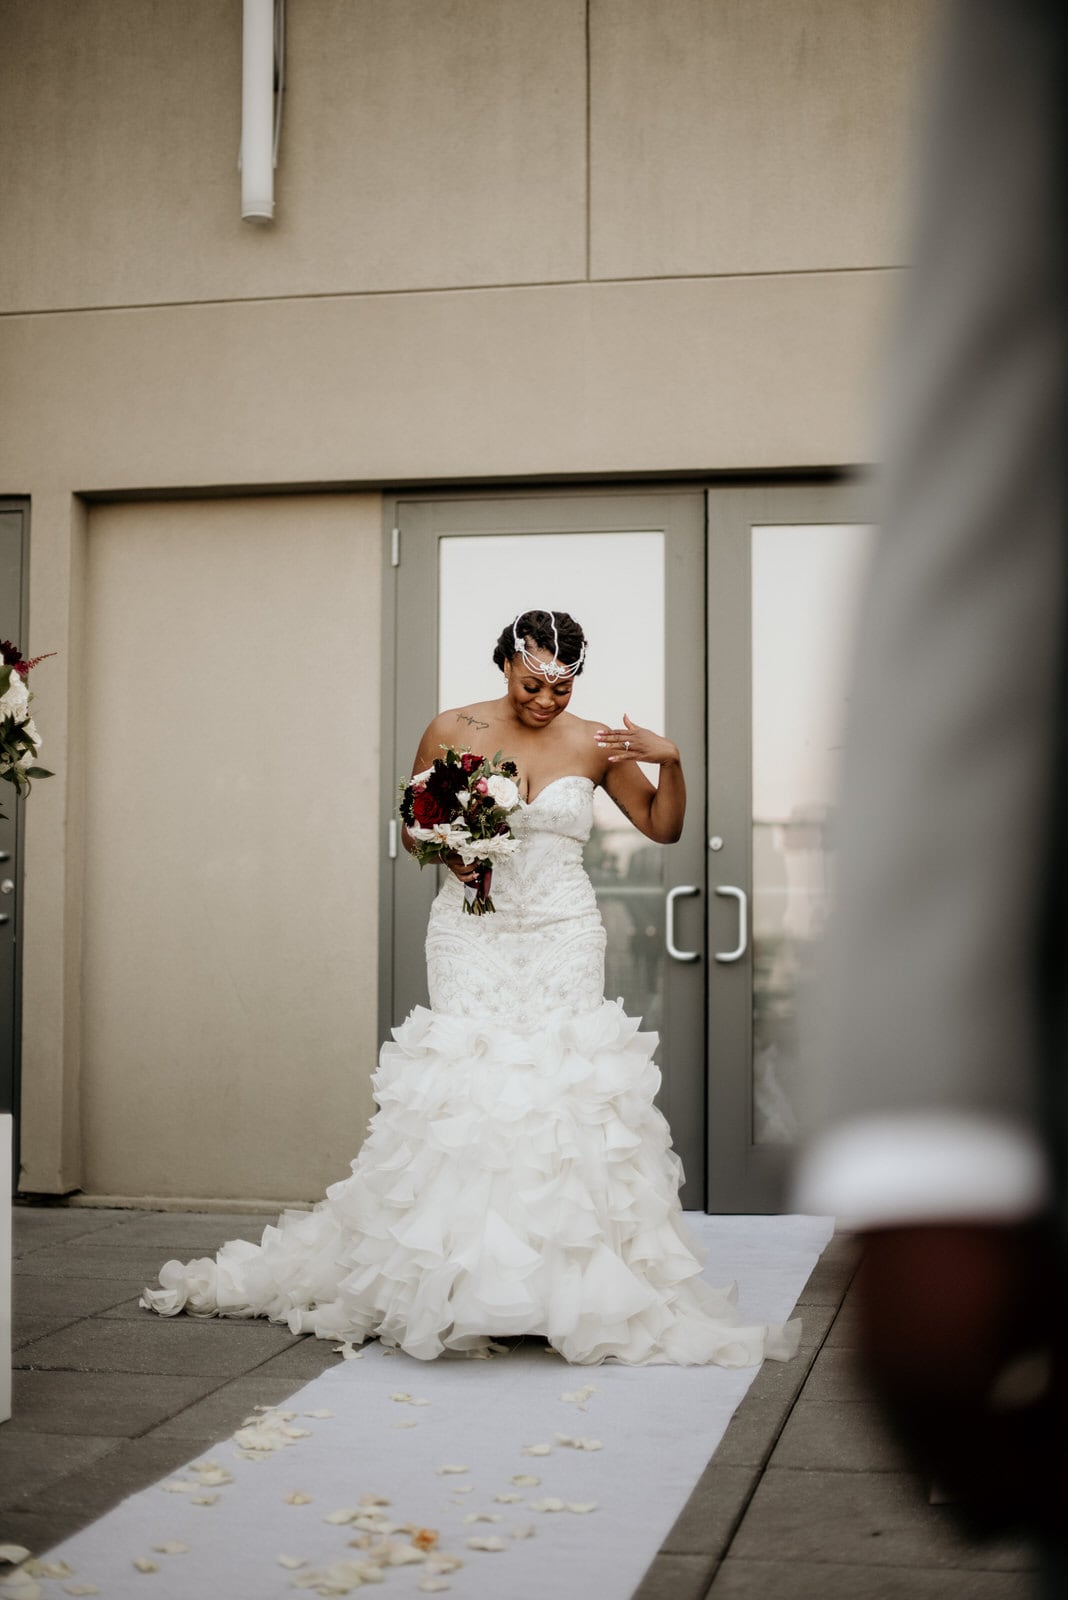 Bride overwhelmed with emotion walking down the aisle